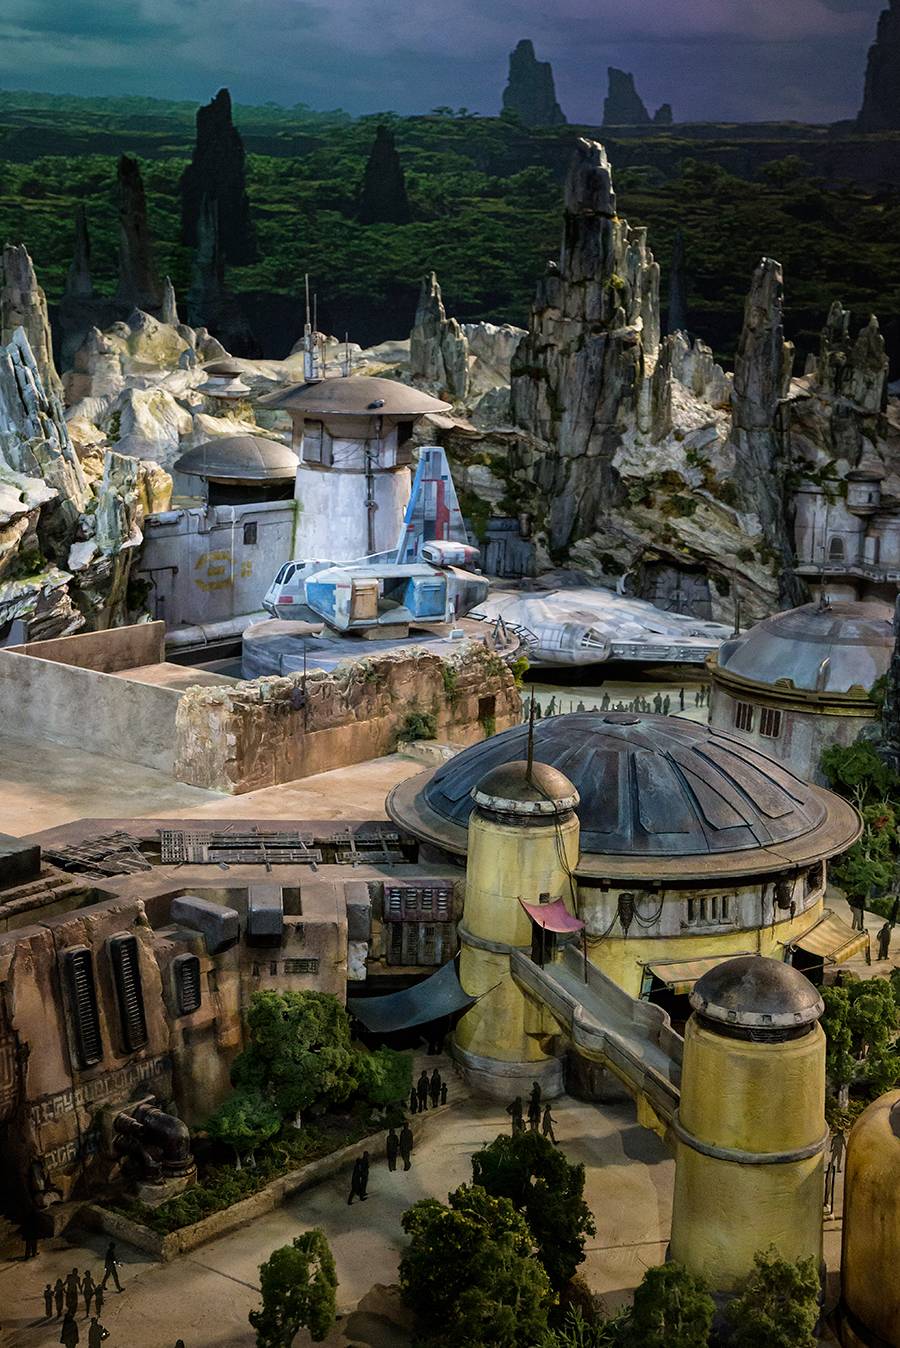 VIDEO - Star Wars Land model revealed at D23 Expo